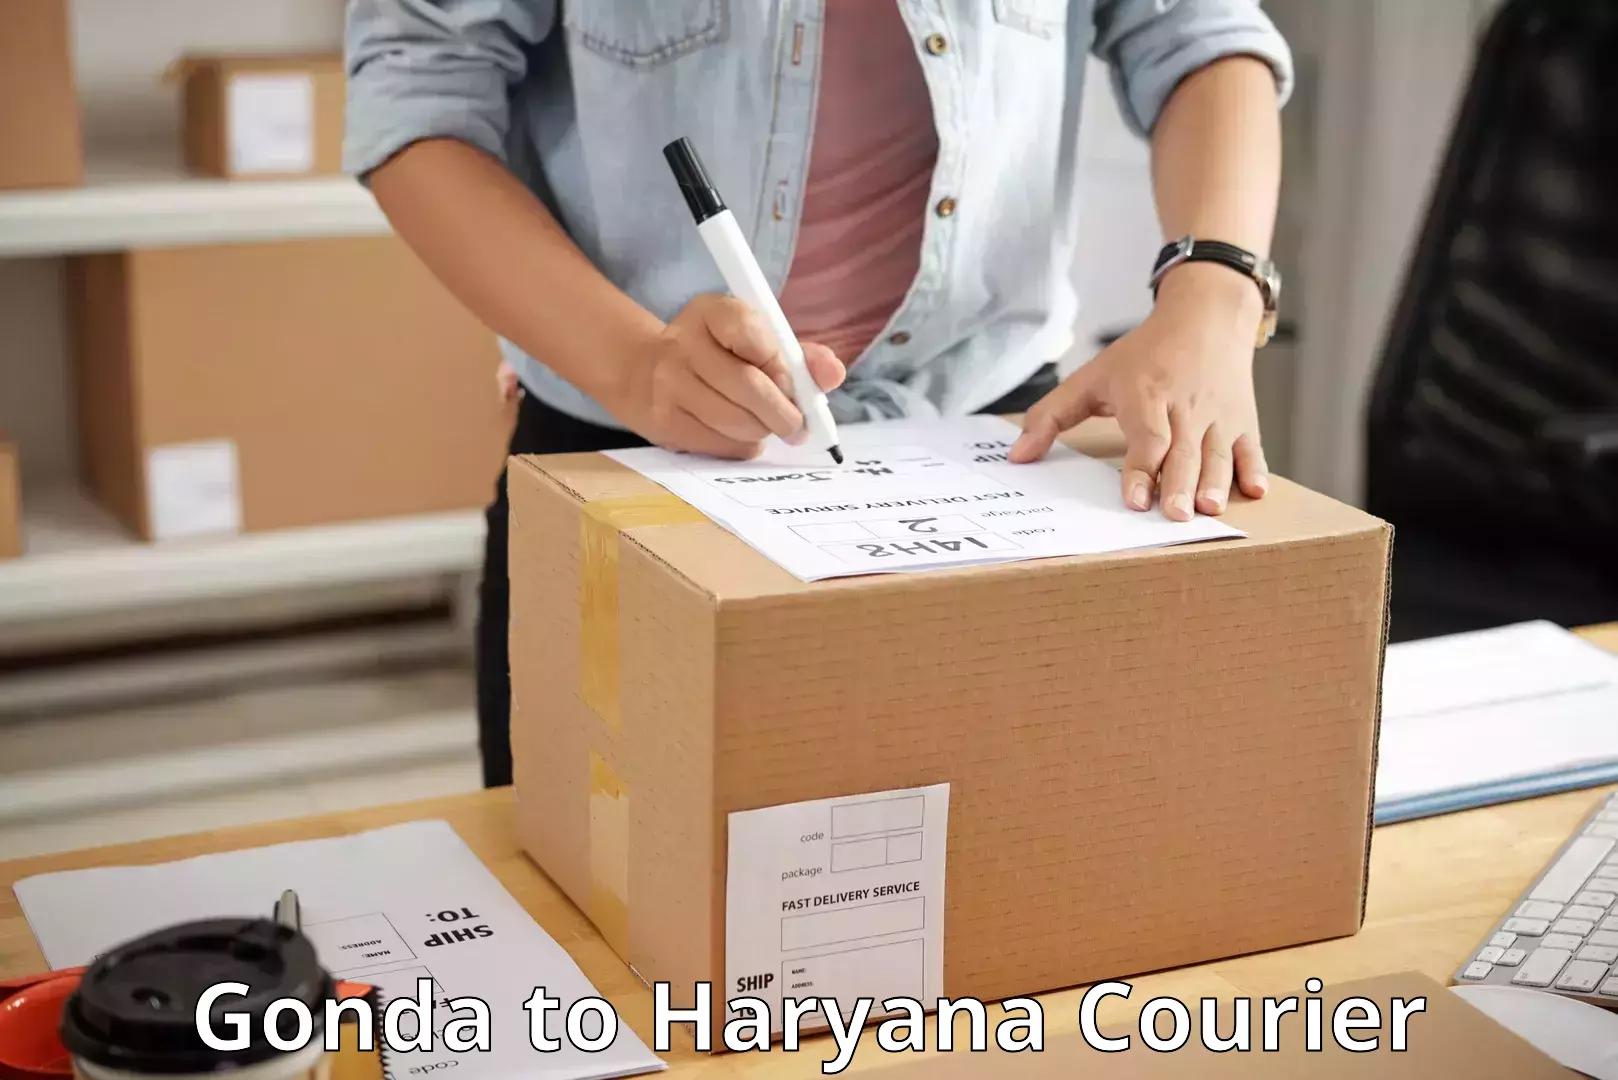 Business delivery service Gonda to Haryana